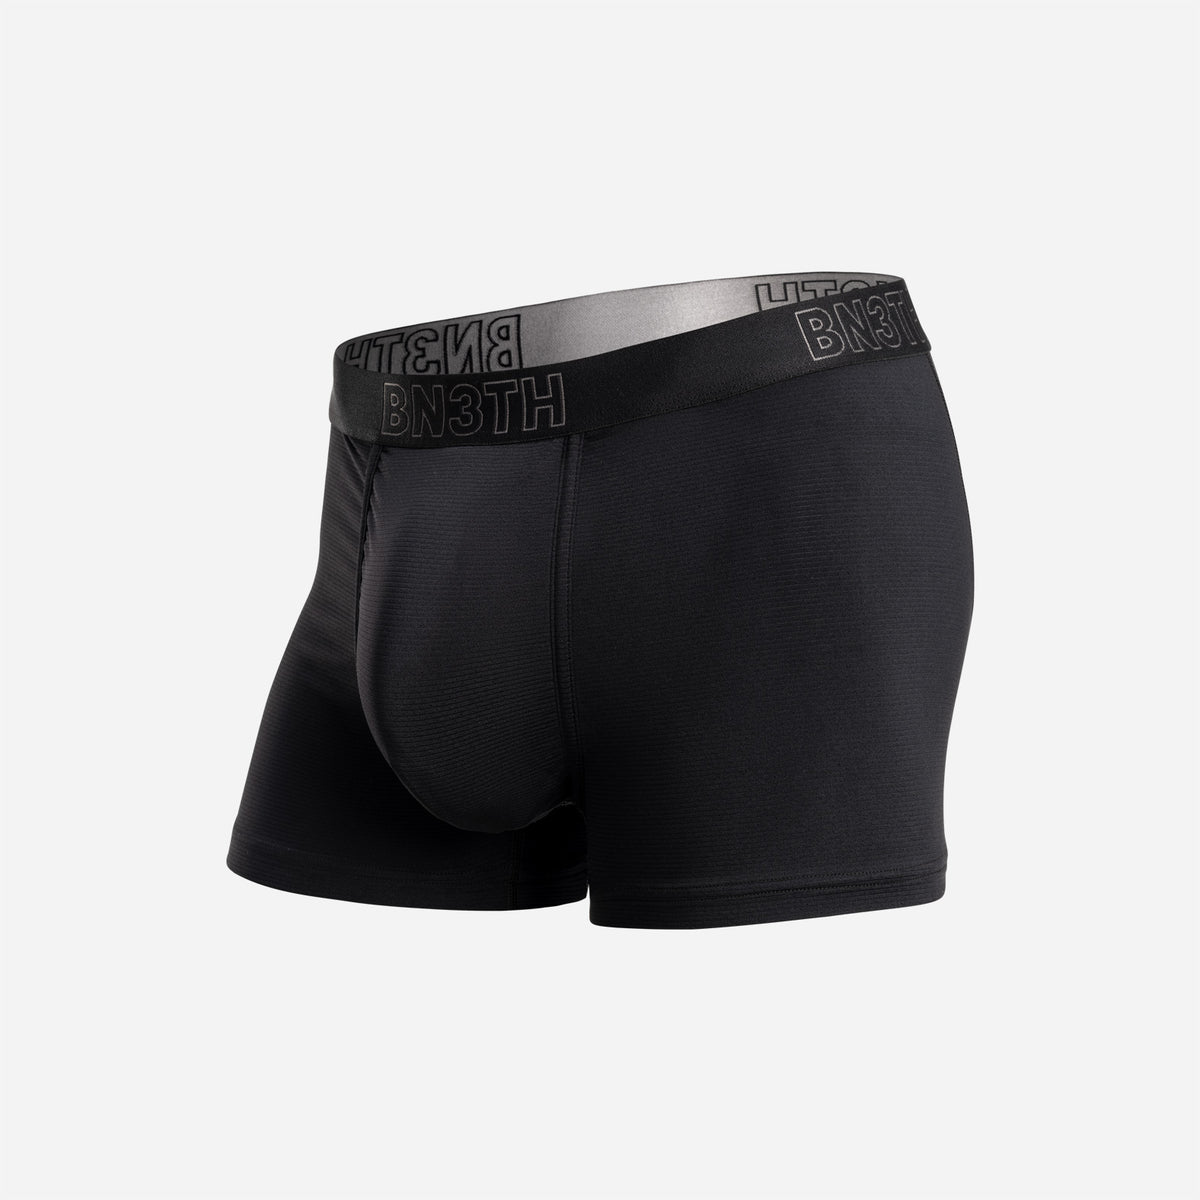  BN3TH Pro Ionic+ Trunk - Men's Black X-Small : Clothing, Shoes  & Jewelry